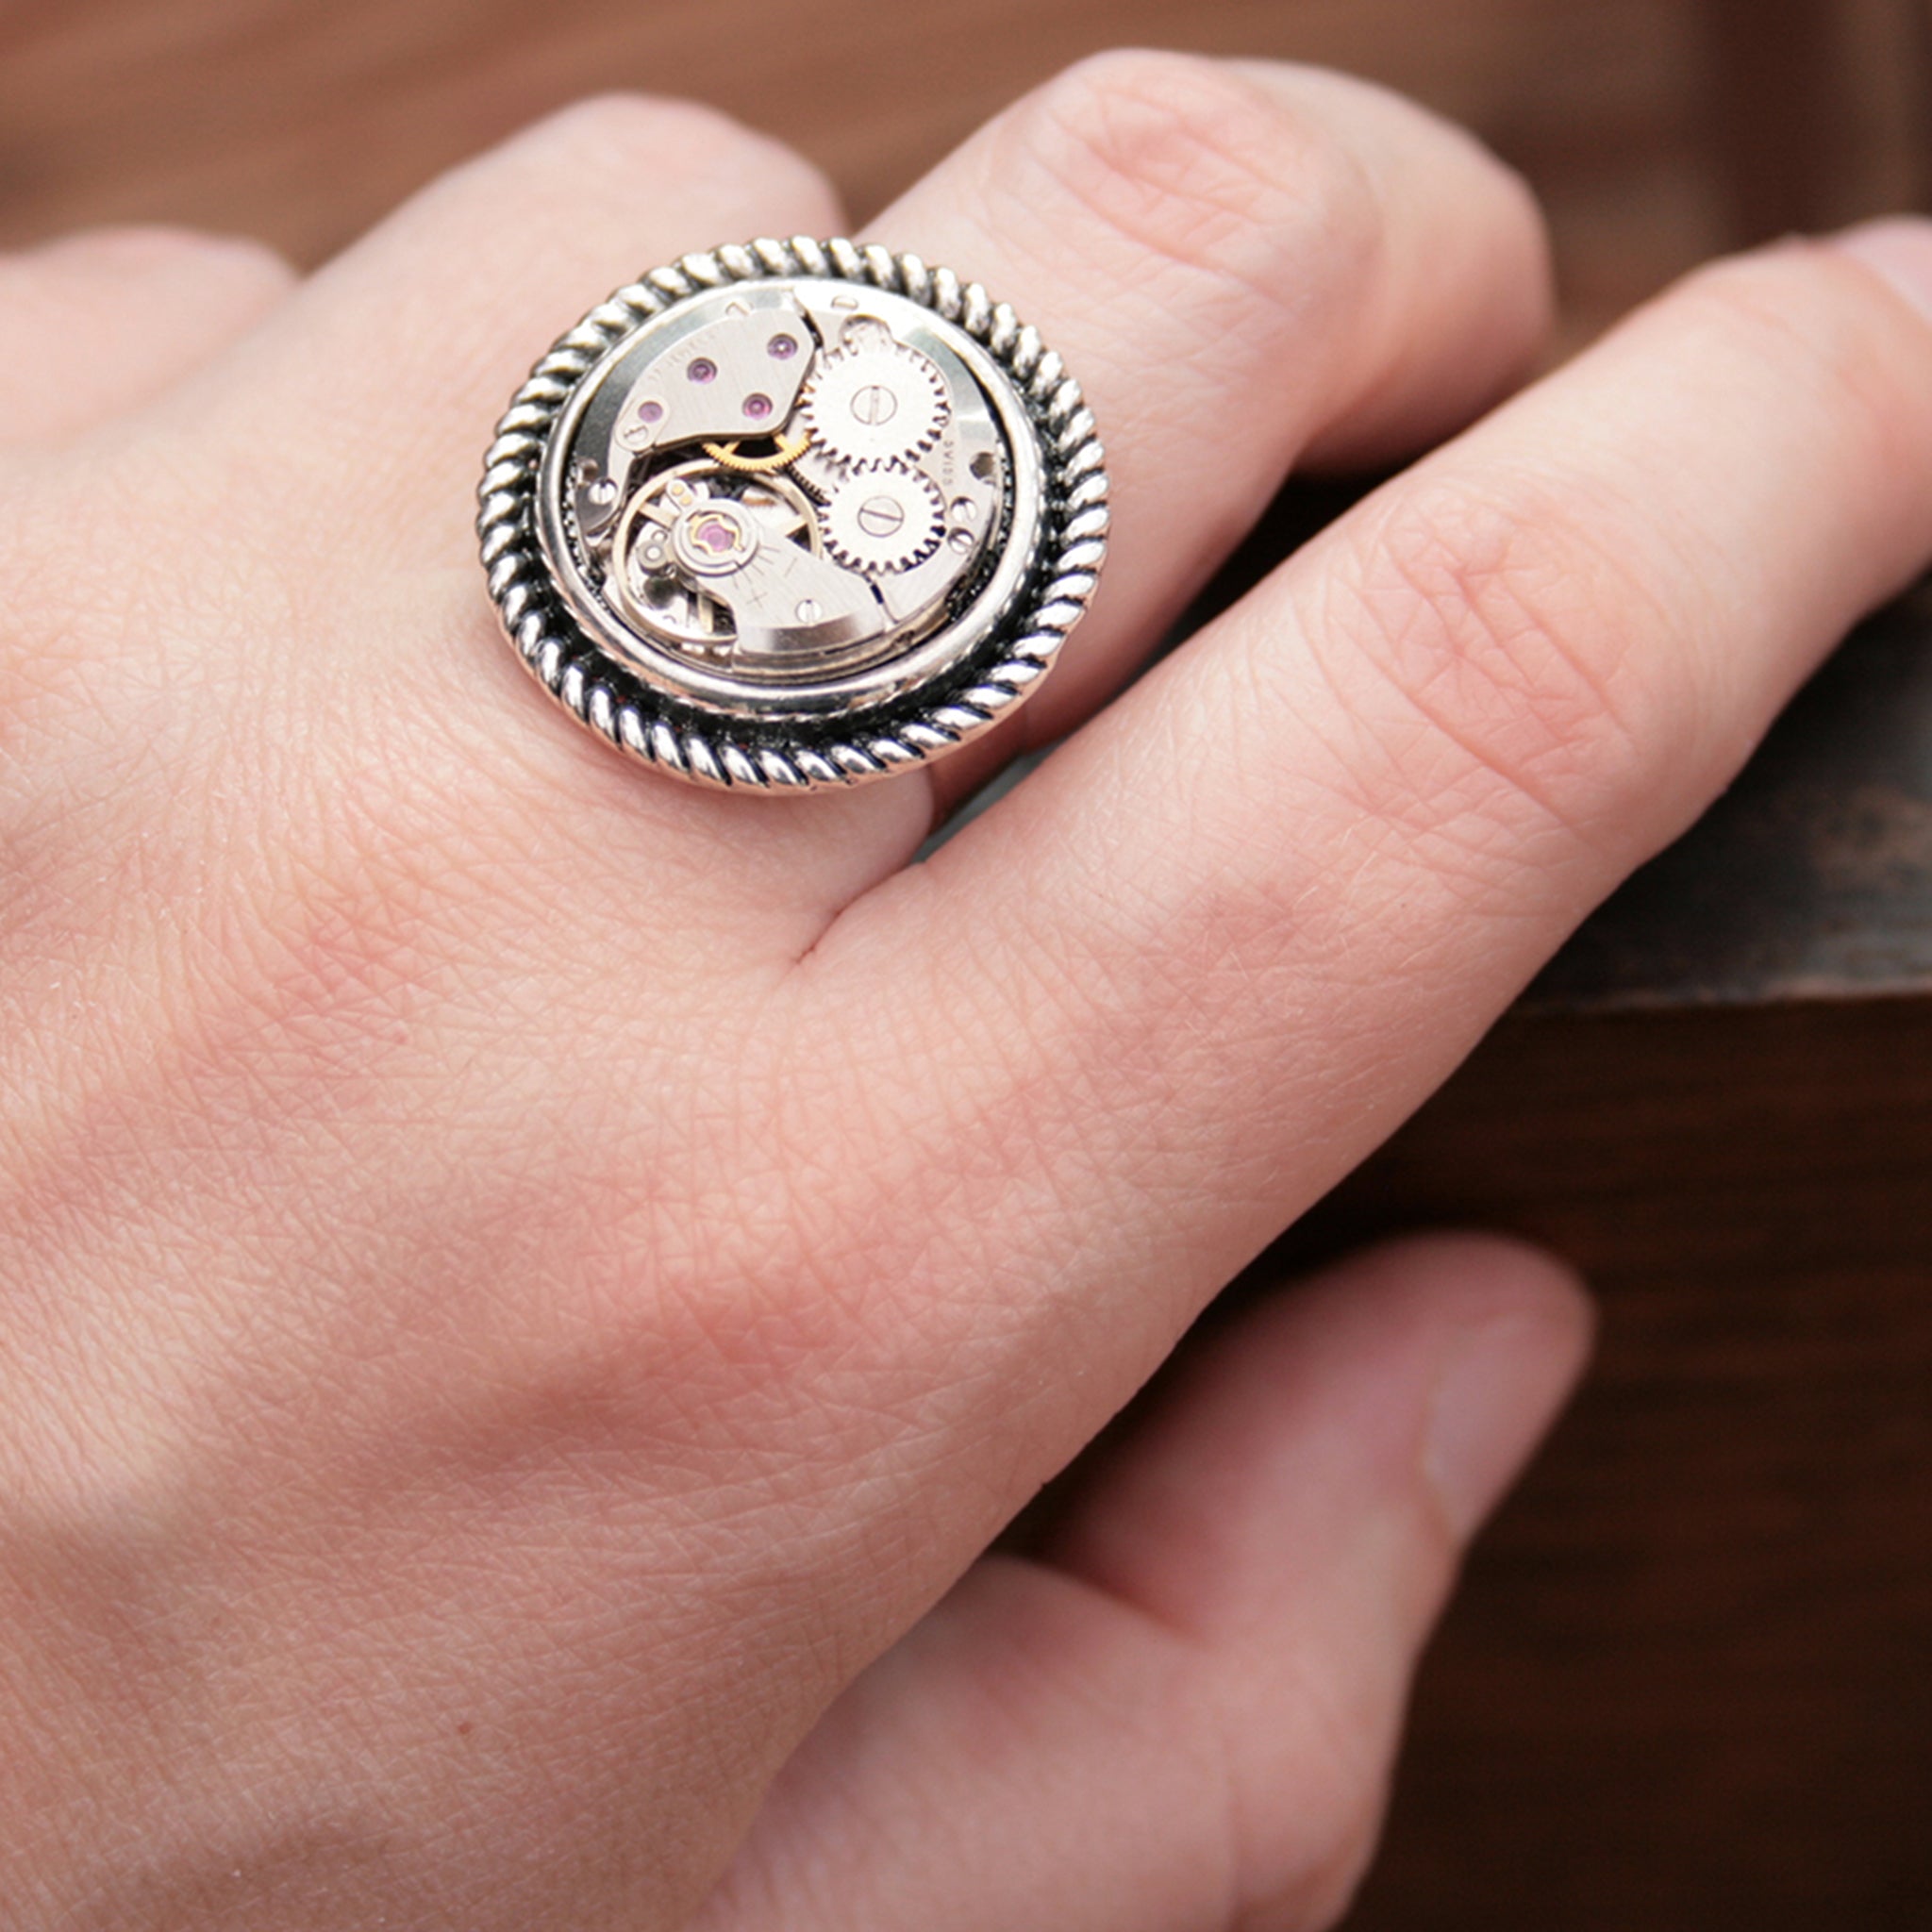 Steampunk Ring for Her made of watch work on hand